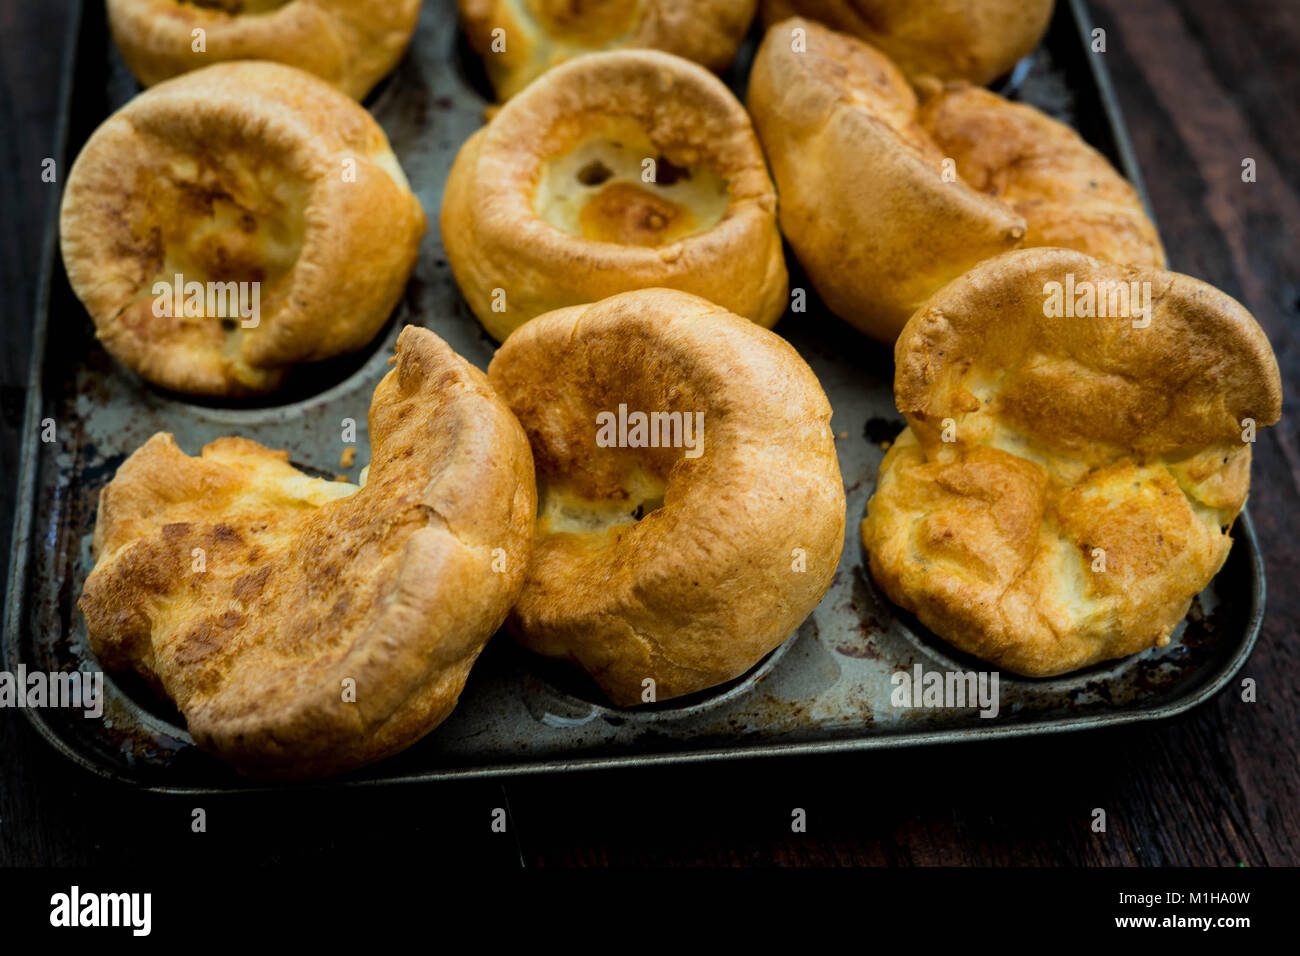 Yorkshire Puddings cooked IN A YORKSHIRE PUDDING TIN Stock Photo